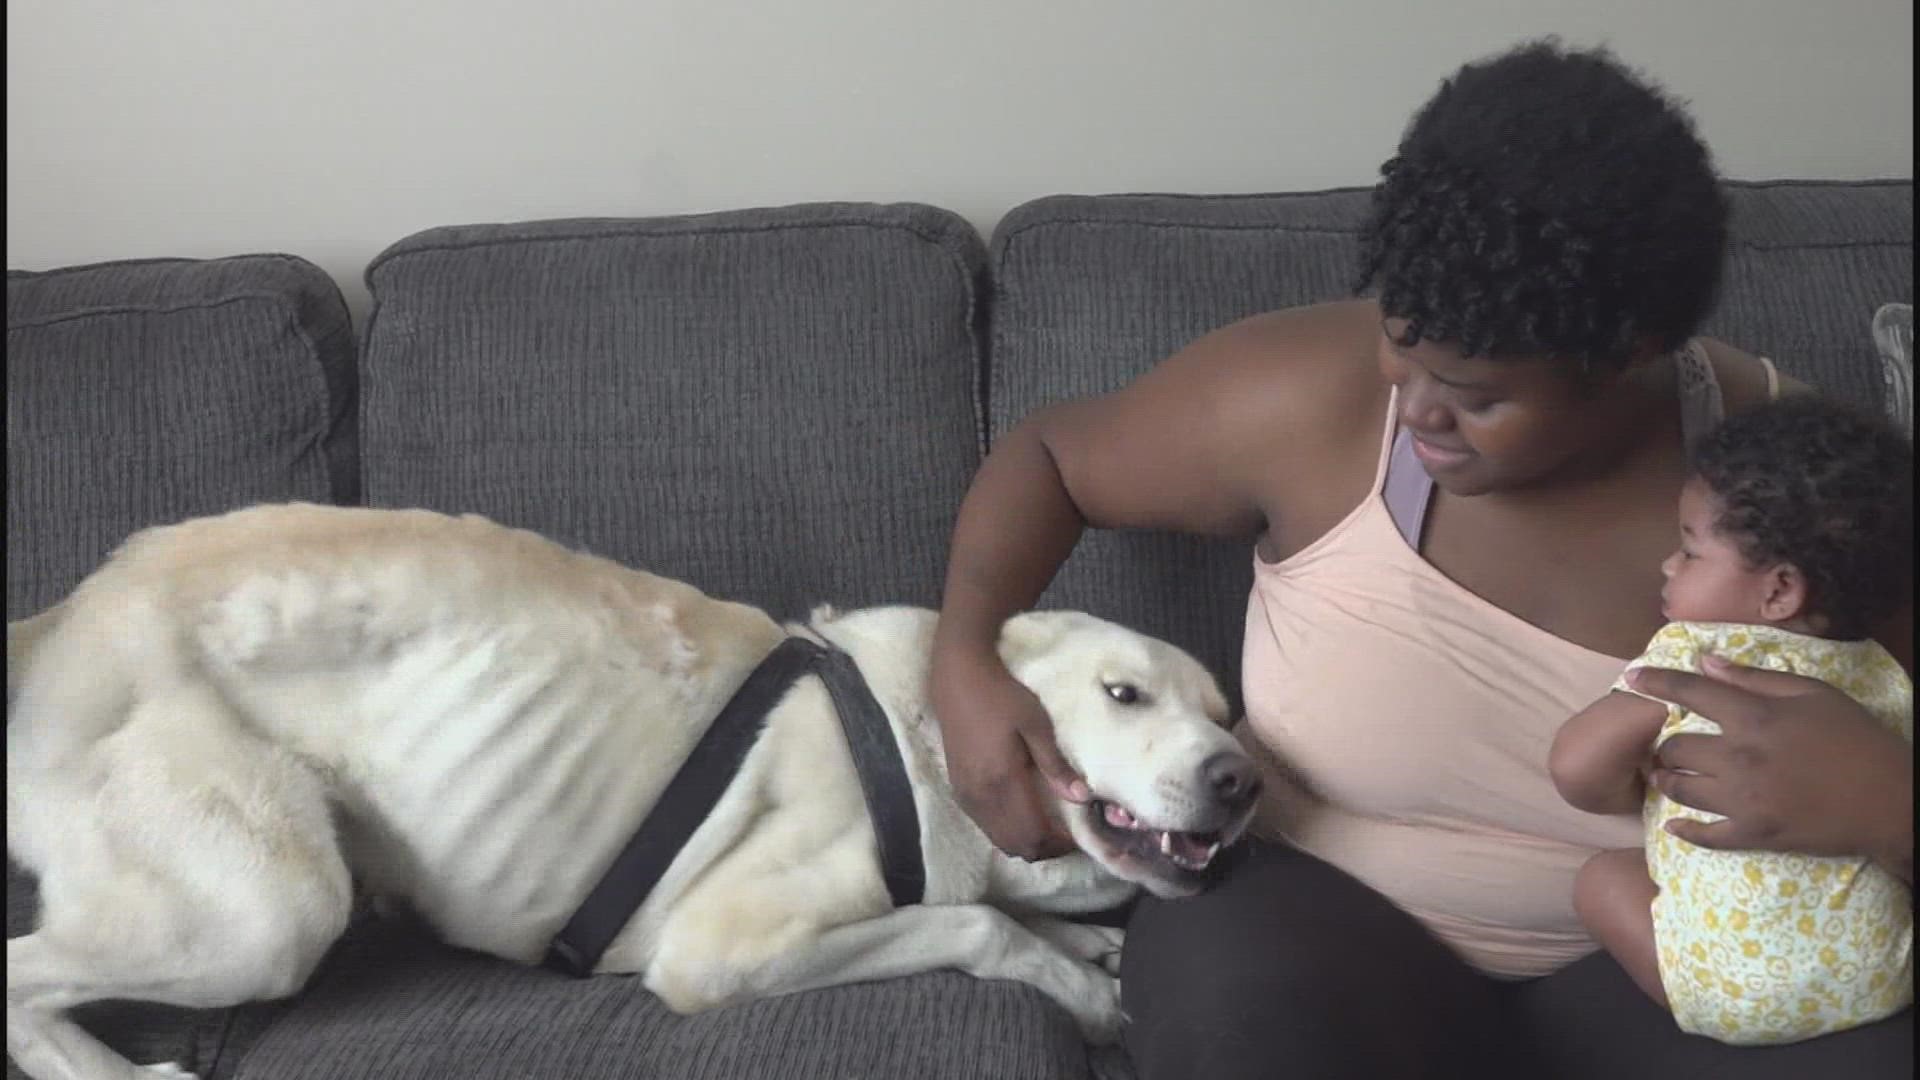 Chekia Cermack was reunited with her lost dog after three years thanks to a microchip from the Franklin County Dog Shelter.